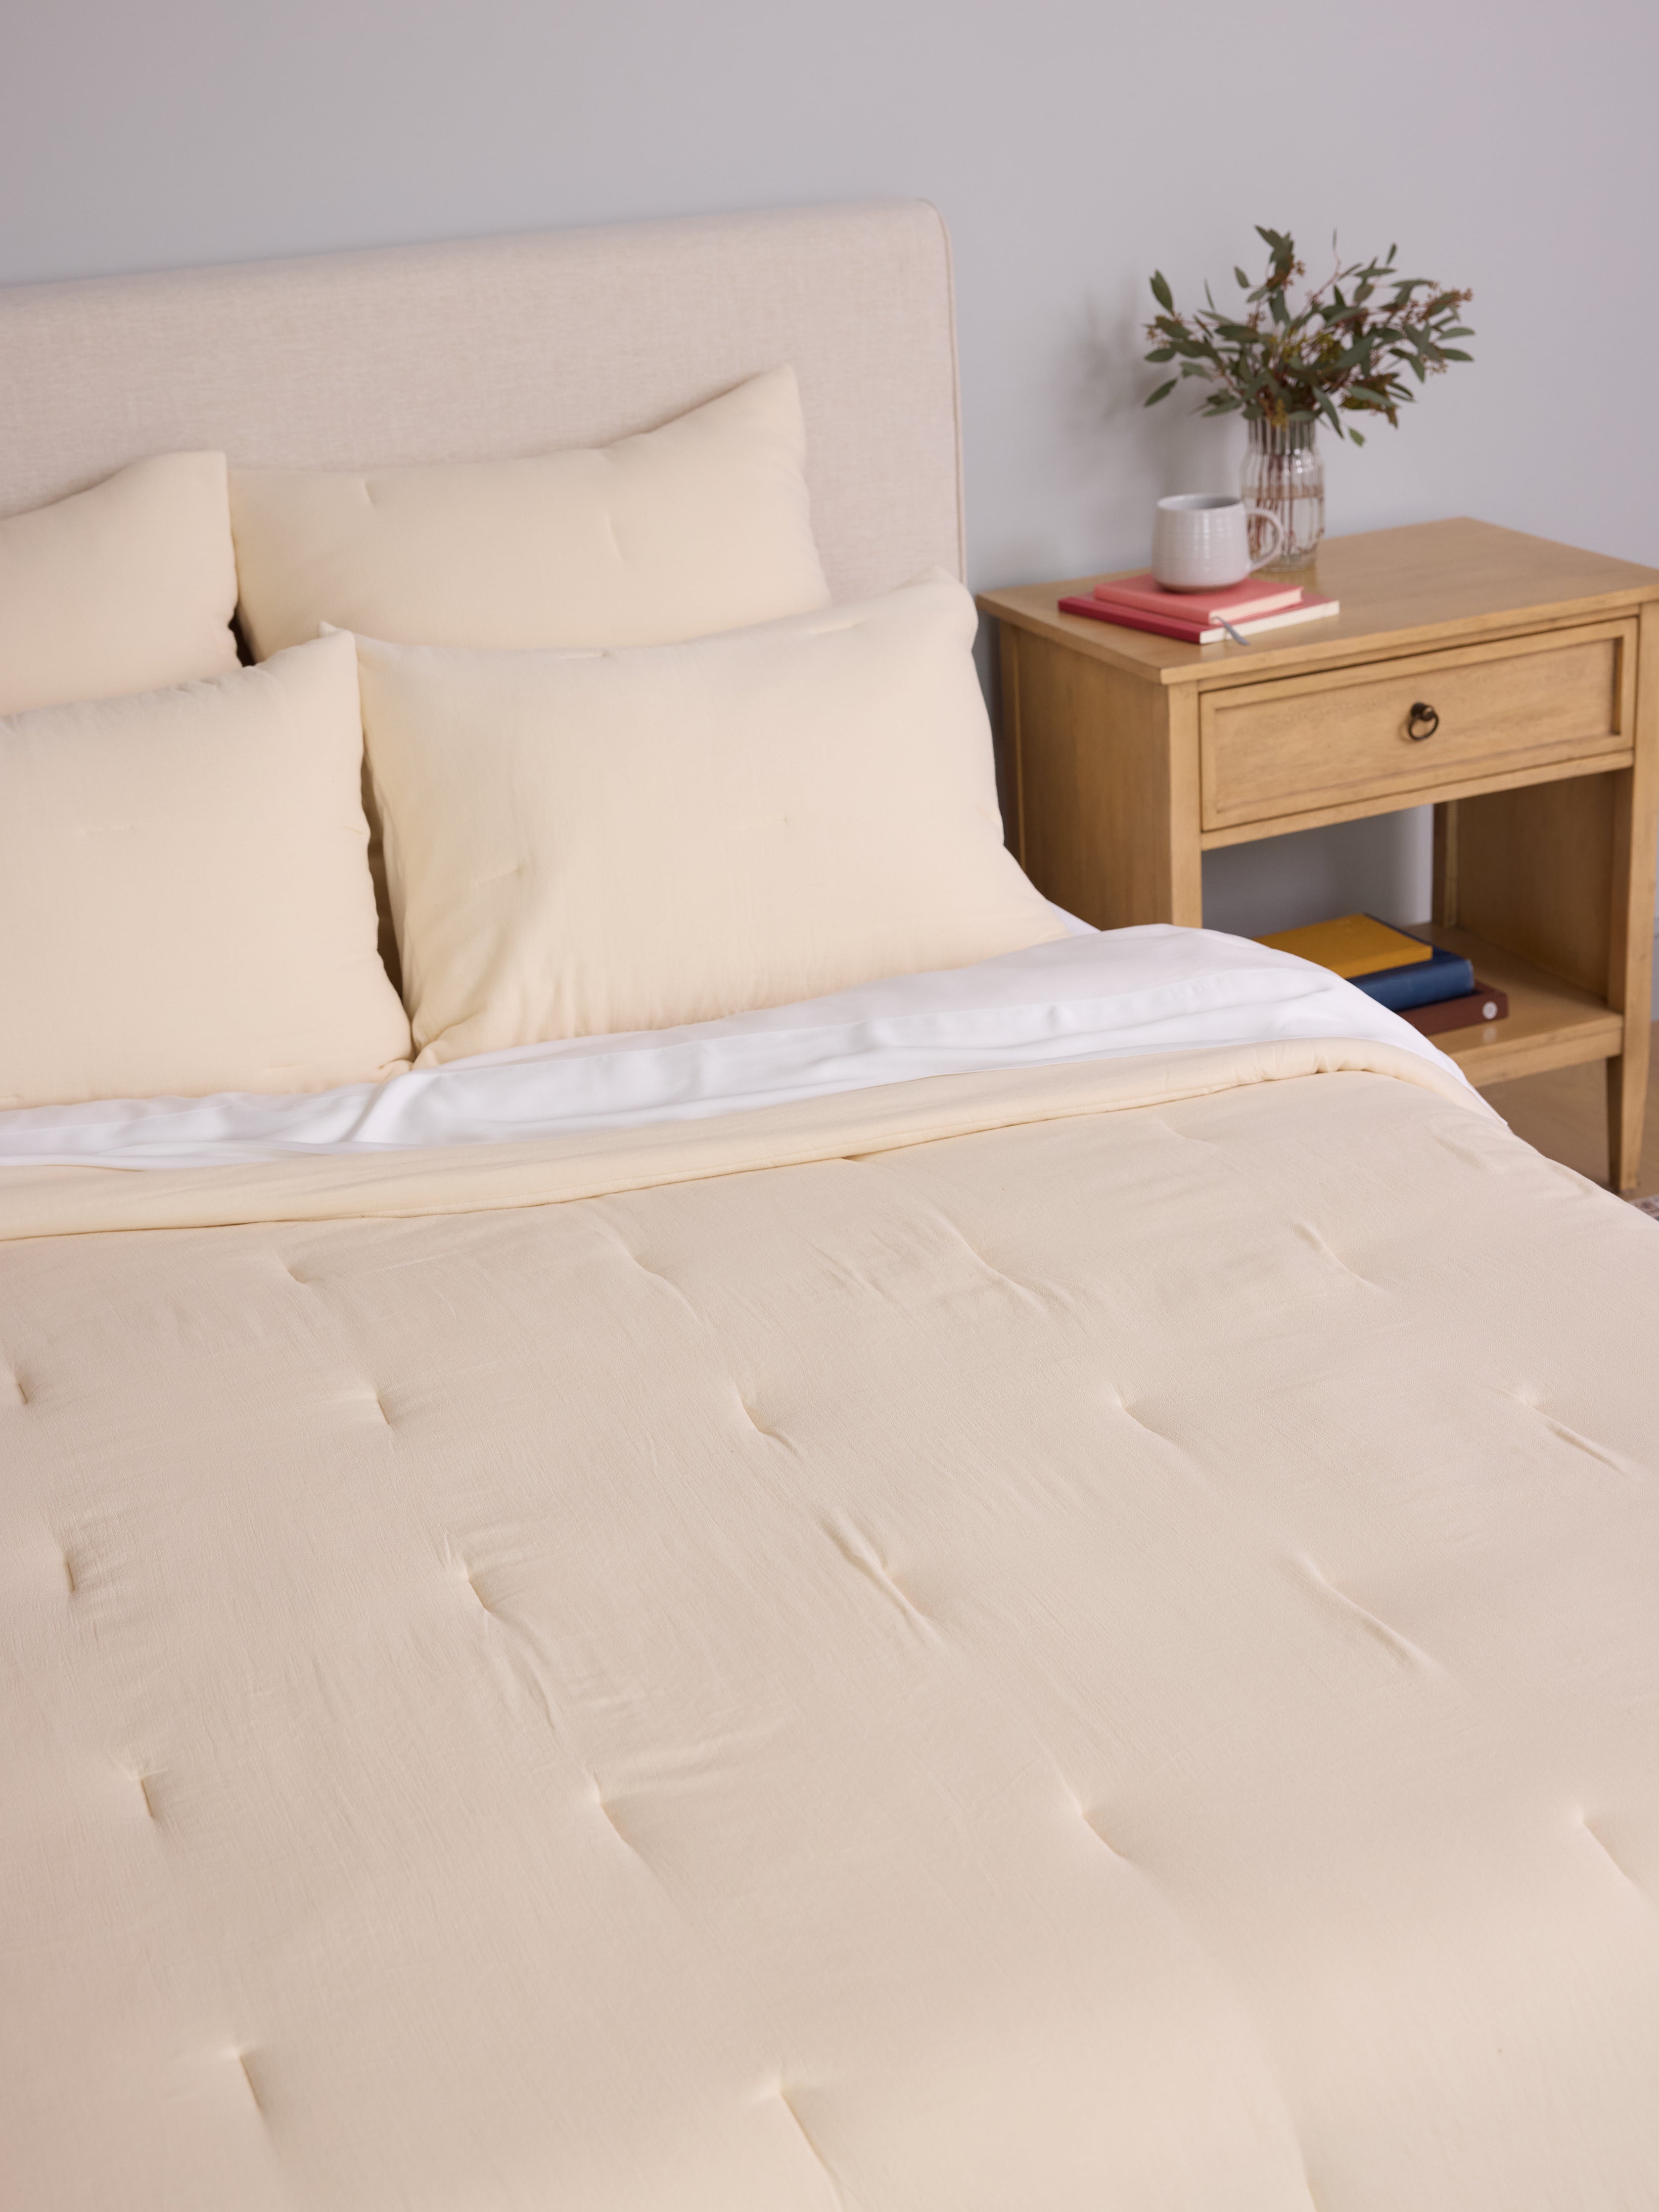 Buttermilk Aire Bamboo Puckered Quilt. The Quilt has been photographed while on a bed in a home bedroom.|Color:Buttermilk